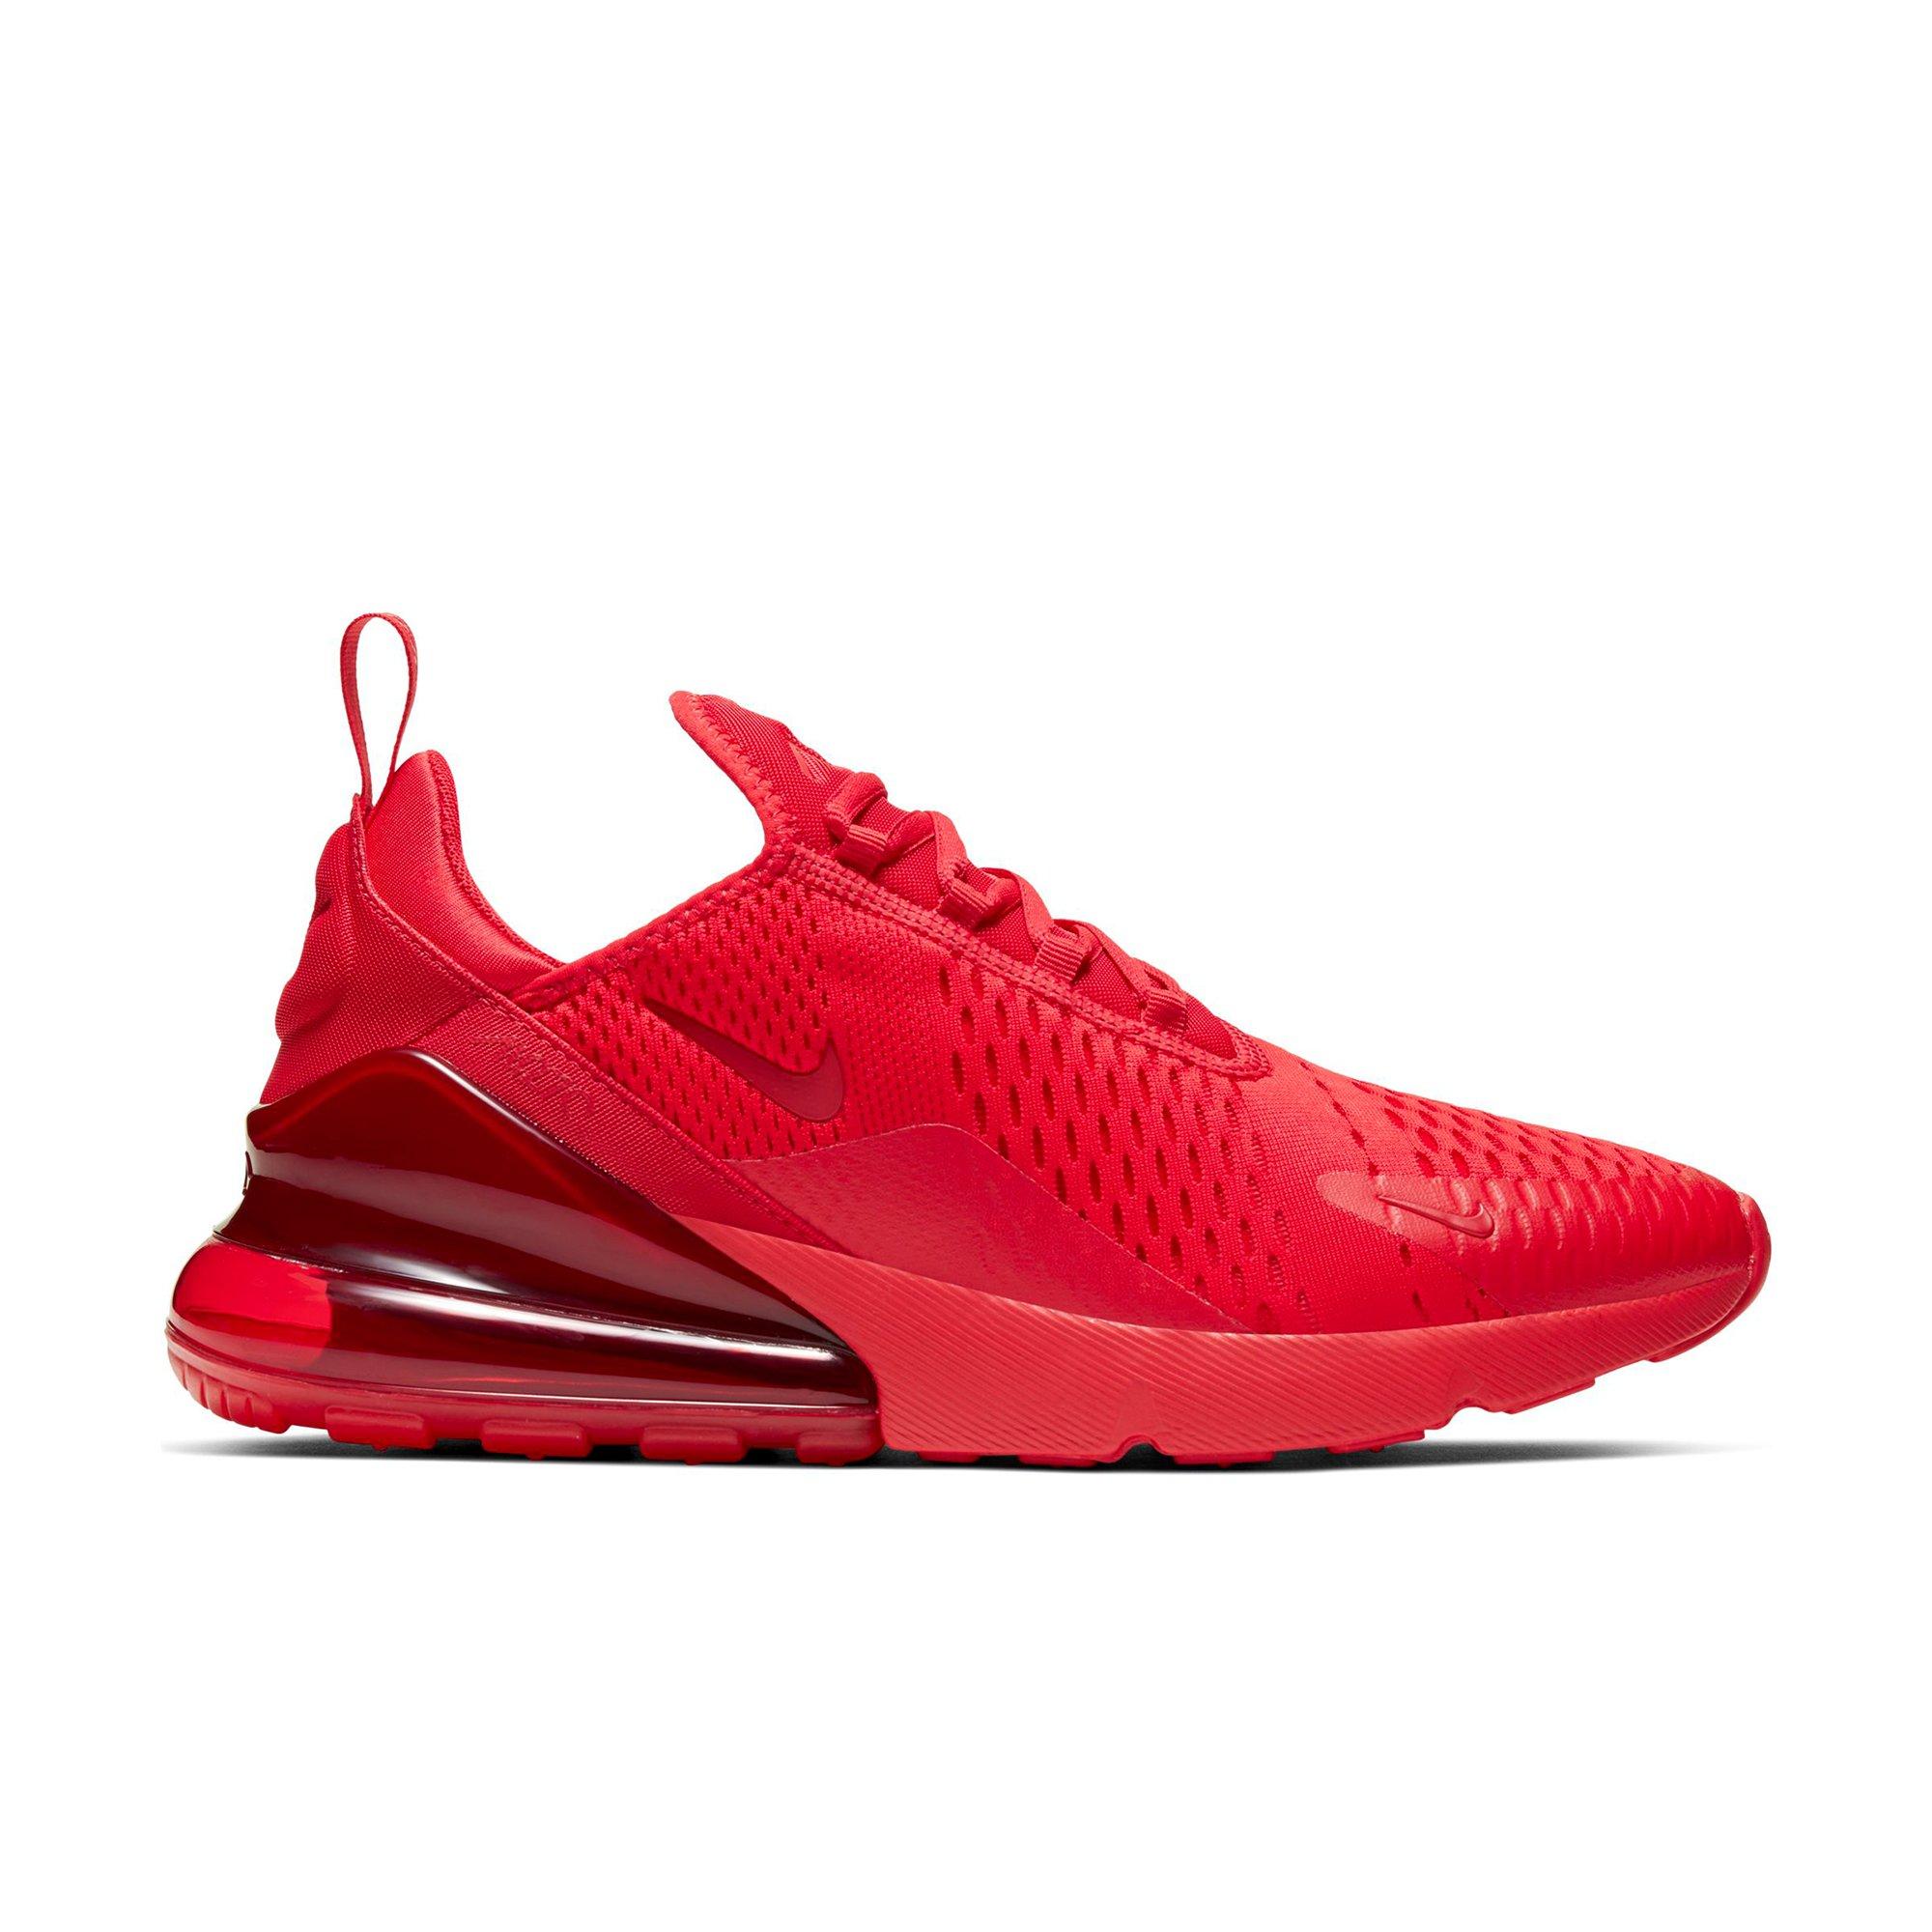 red nike air max men,OFF 73%,www.concordehotels.com.tr